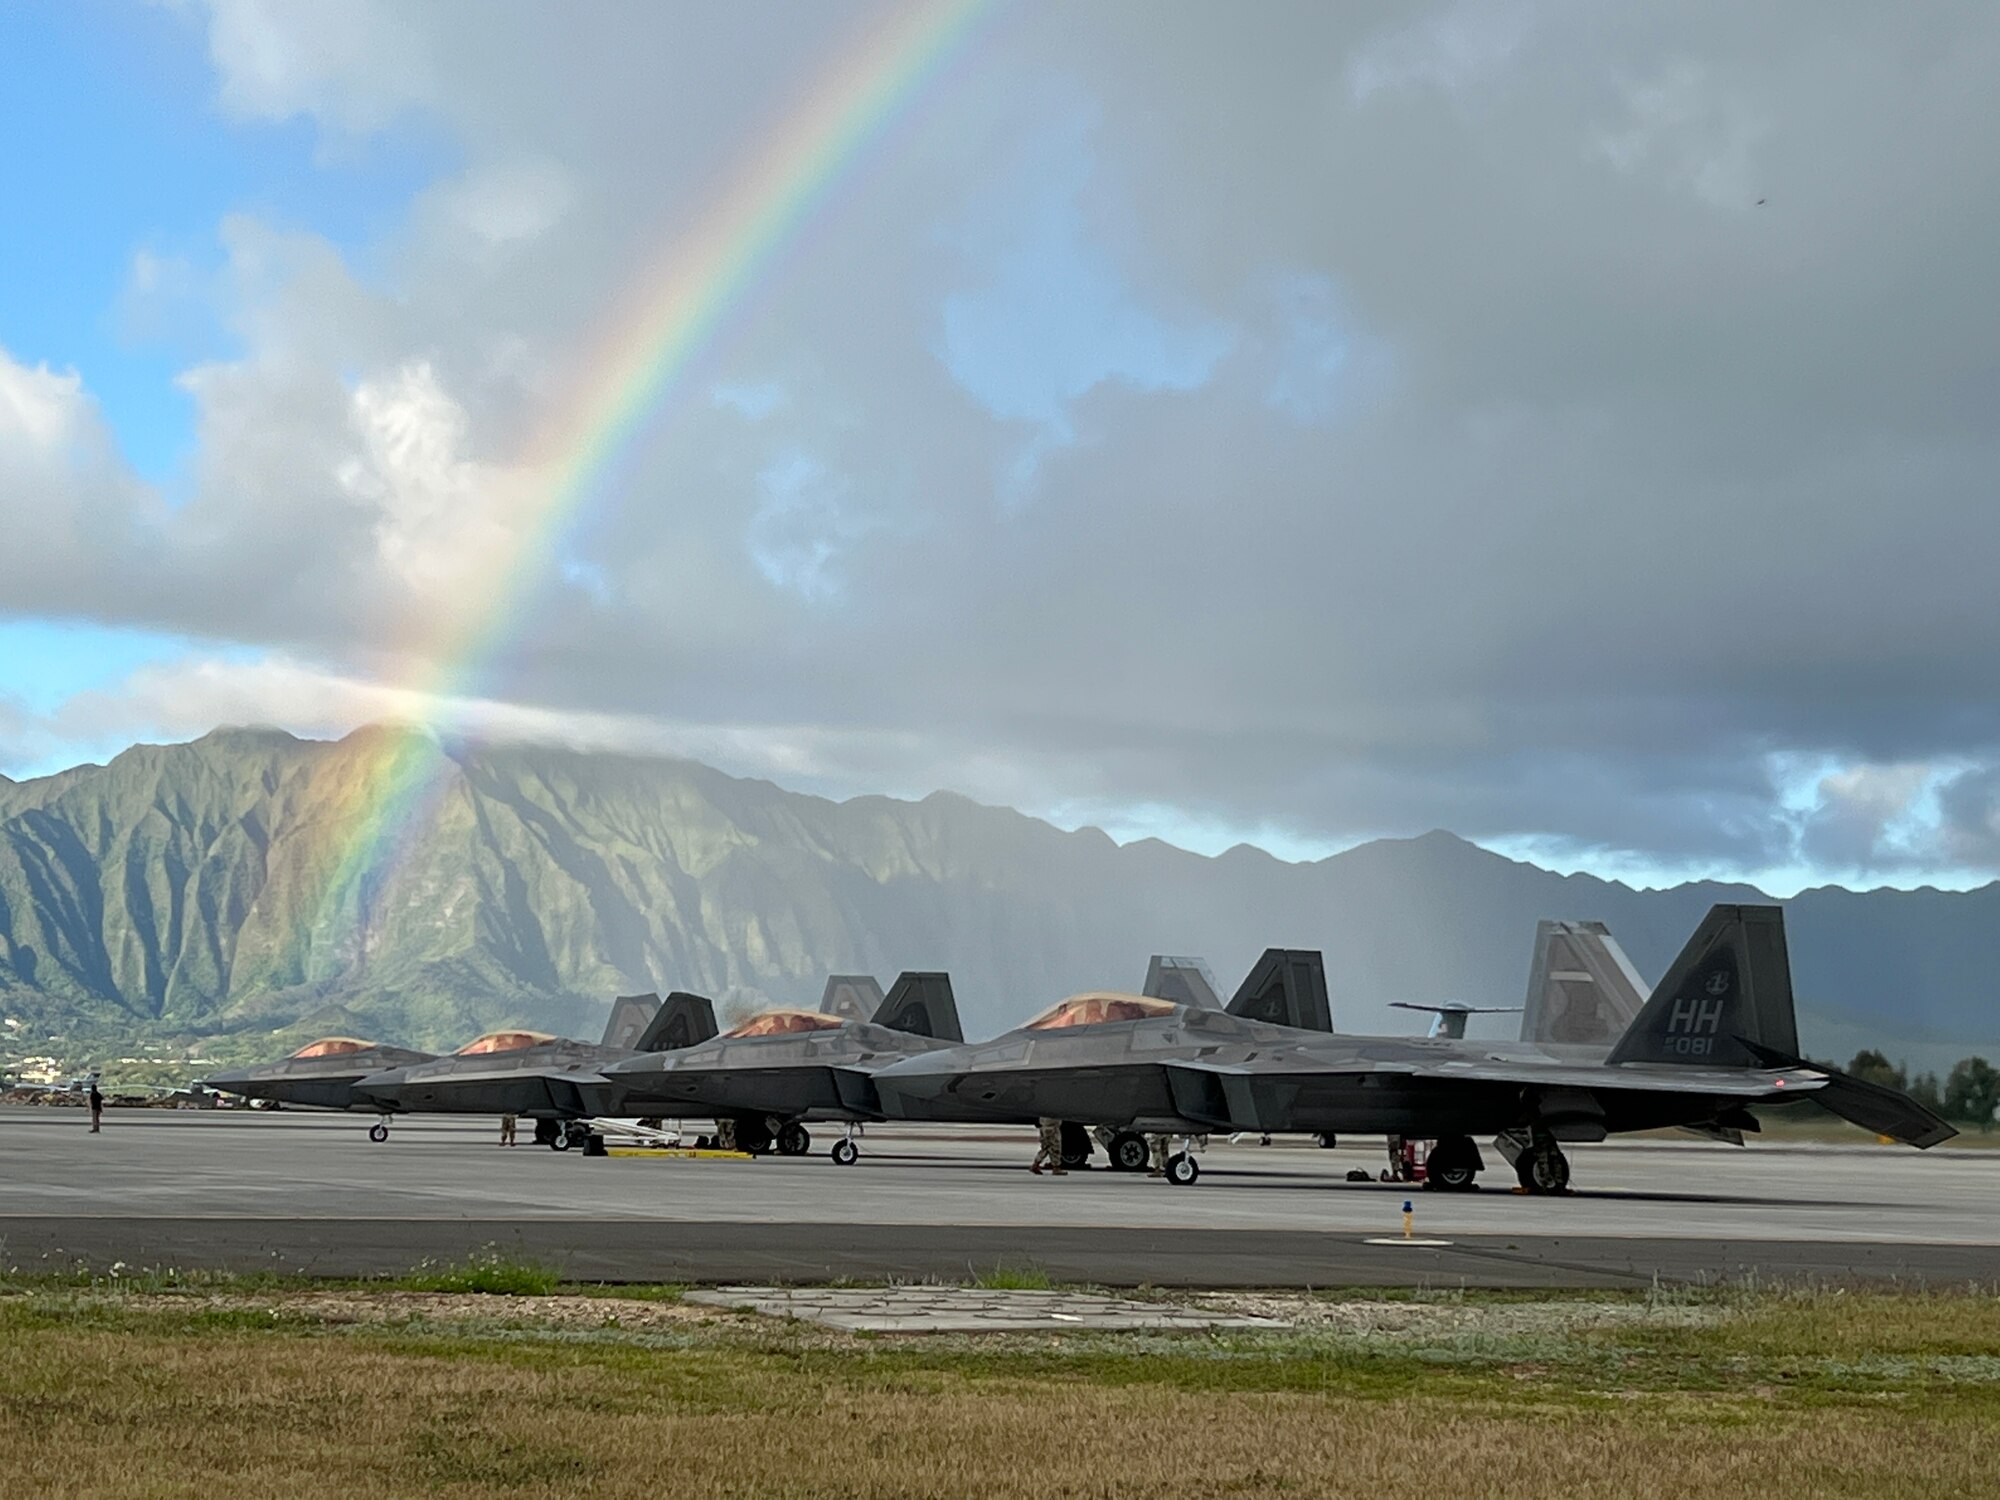 F-22 Raptors assigned to the Hawaii Air National Guard 199th Fighter Squadron and the active duty 19th Fighter Squadron are staged on the flightline of Marine Corps Base Kaneohe, Hawaii, March 3, 2022, during Agile Combat Employment exercise Hoʻoikaika. ACE is an operational concept that leverages networks of well-established and austere air bases, multi-capable airmen, pre-positioned equipment, and airlift to rapidly deploy, disperse and maneuver combat capability throughout a theater.